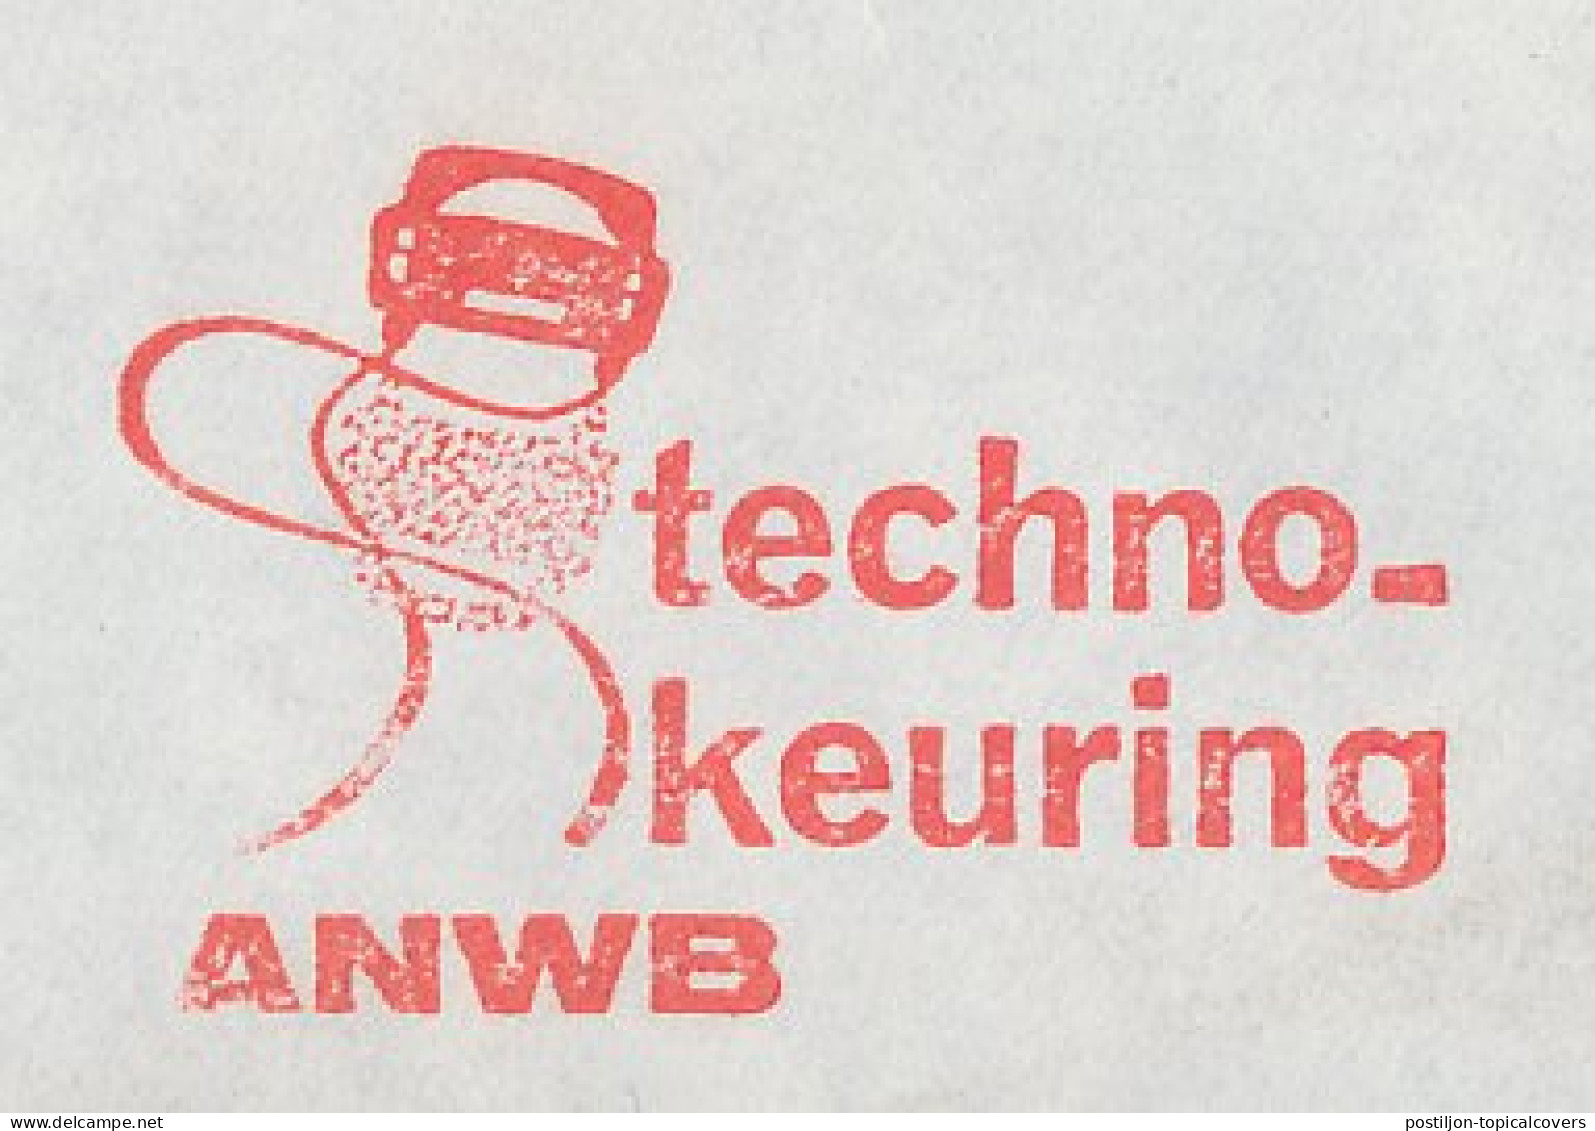 Meter Cover Netherlands 1967 Technical Inspection ANWB - General Dutch Cycling Association - Cars